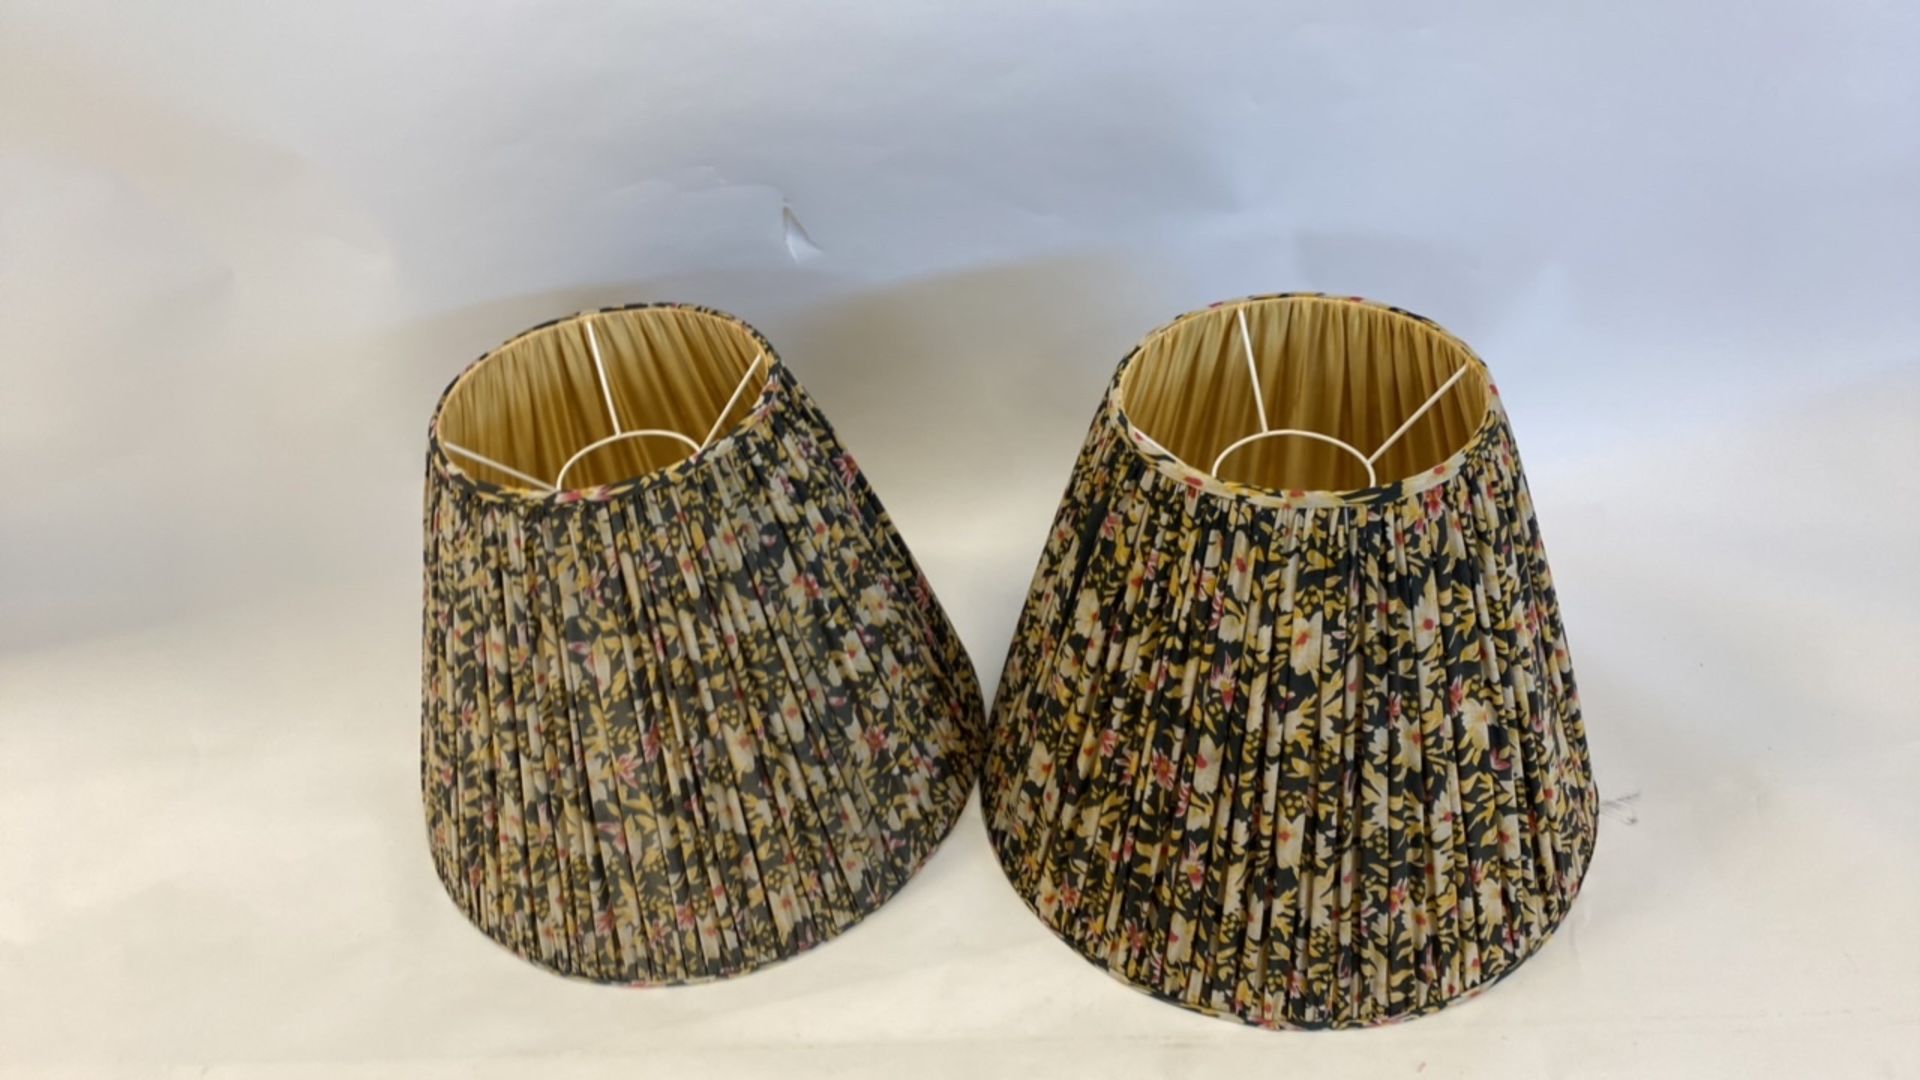 2x Lamp Shades With Flower Pattern - Image 2 of 4